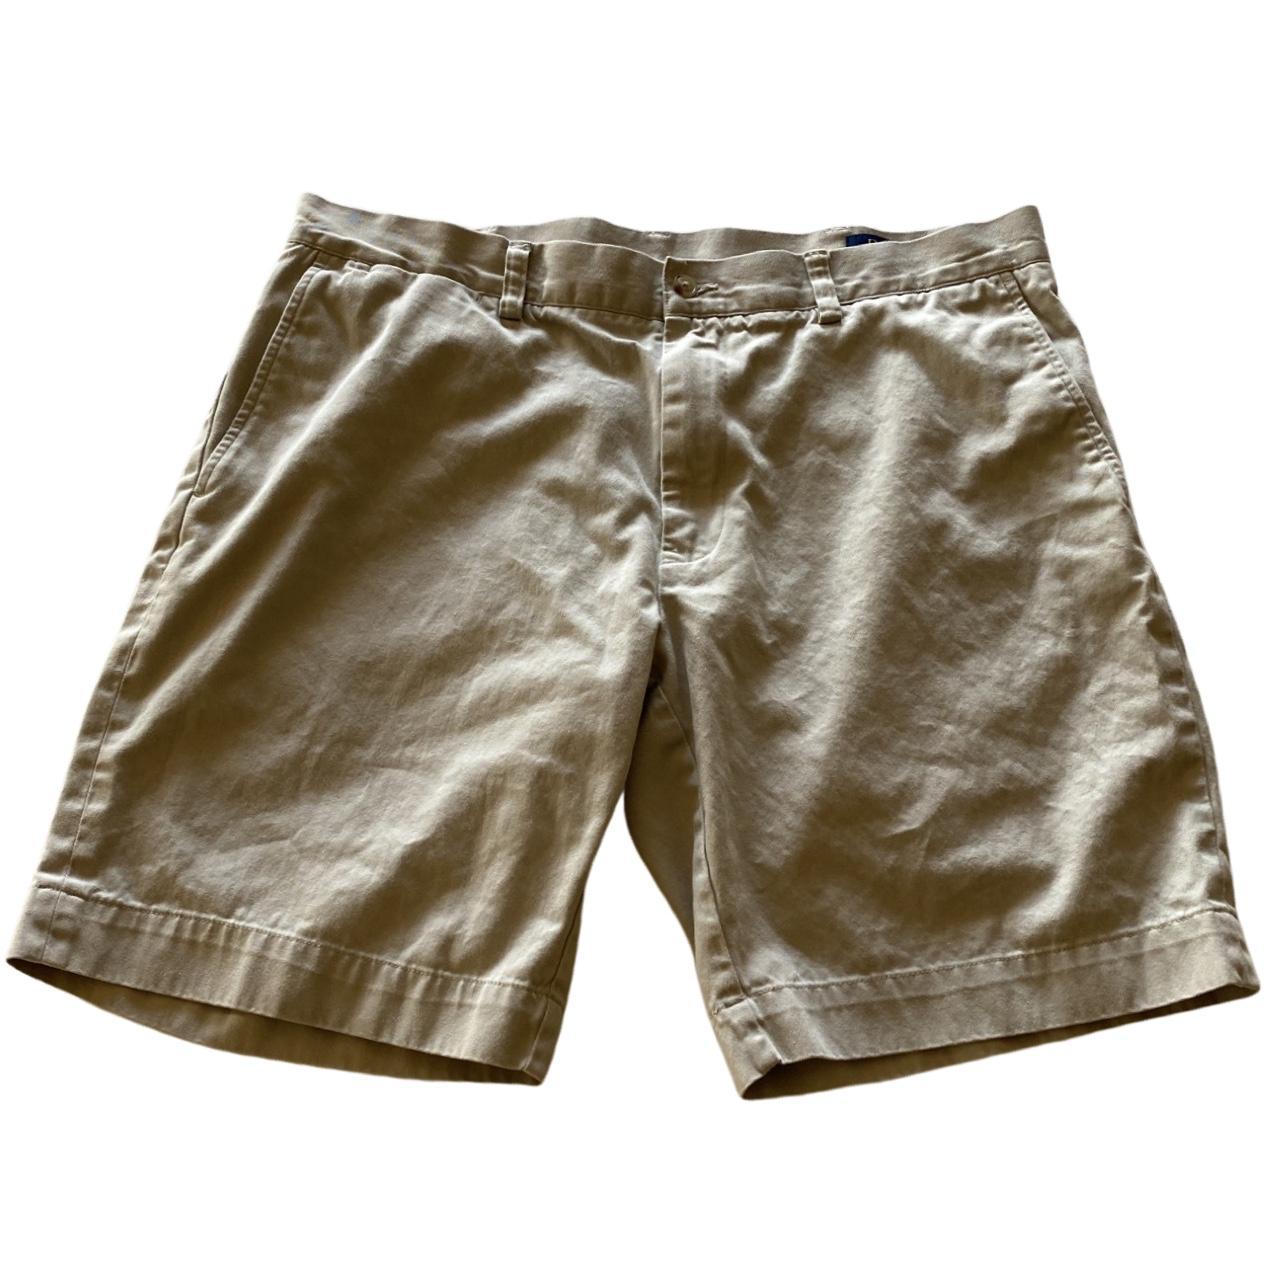 Product Image 1 - These are a pair of